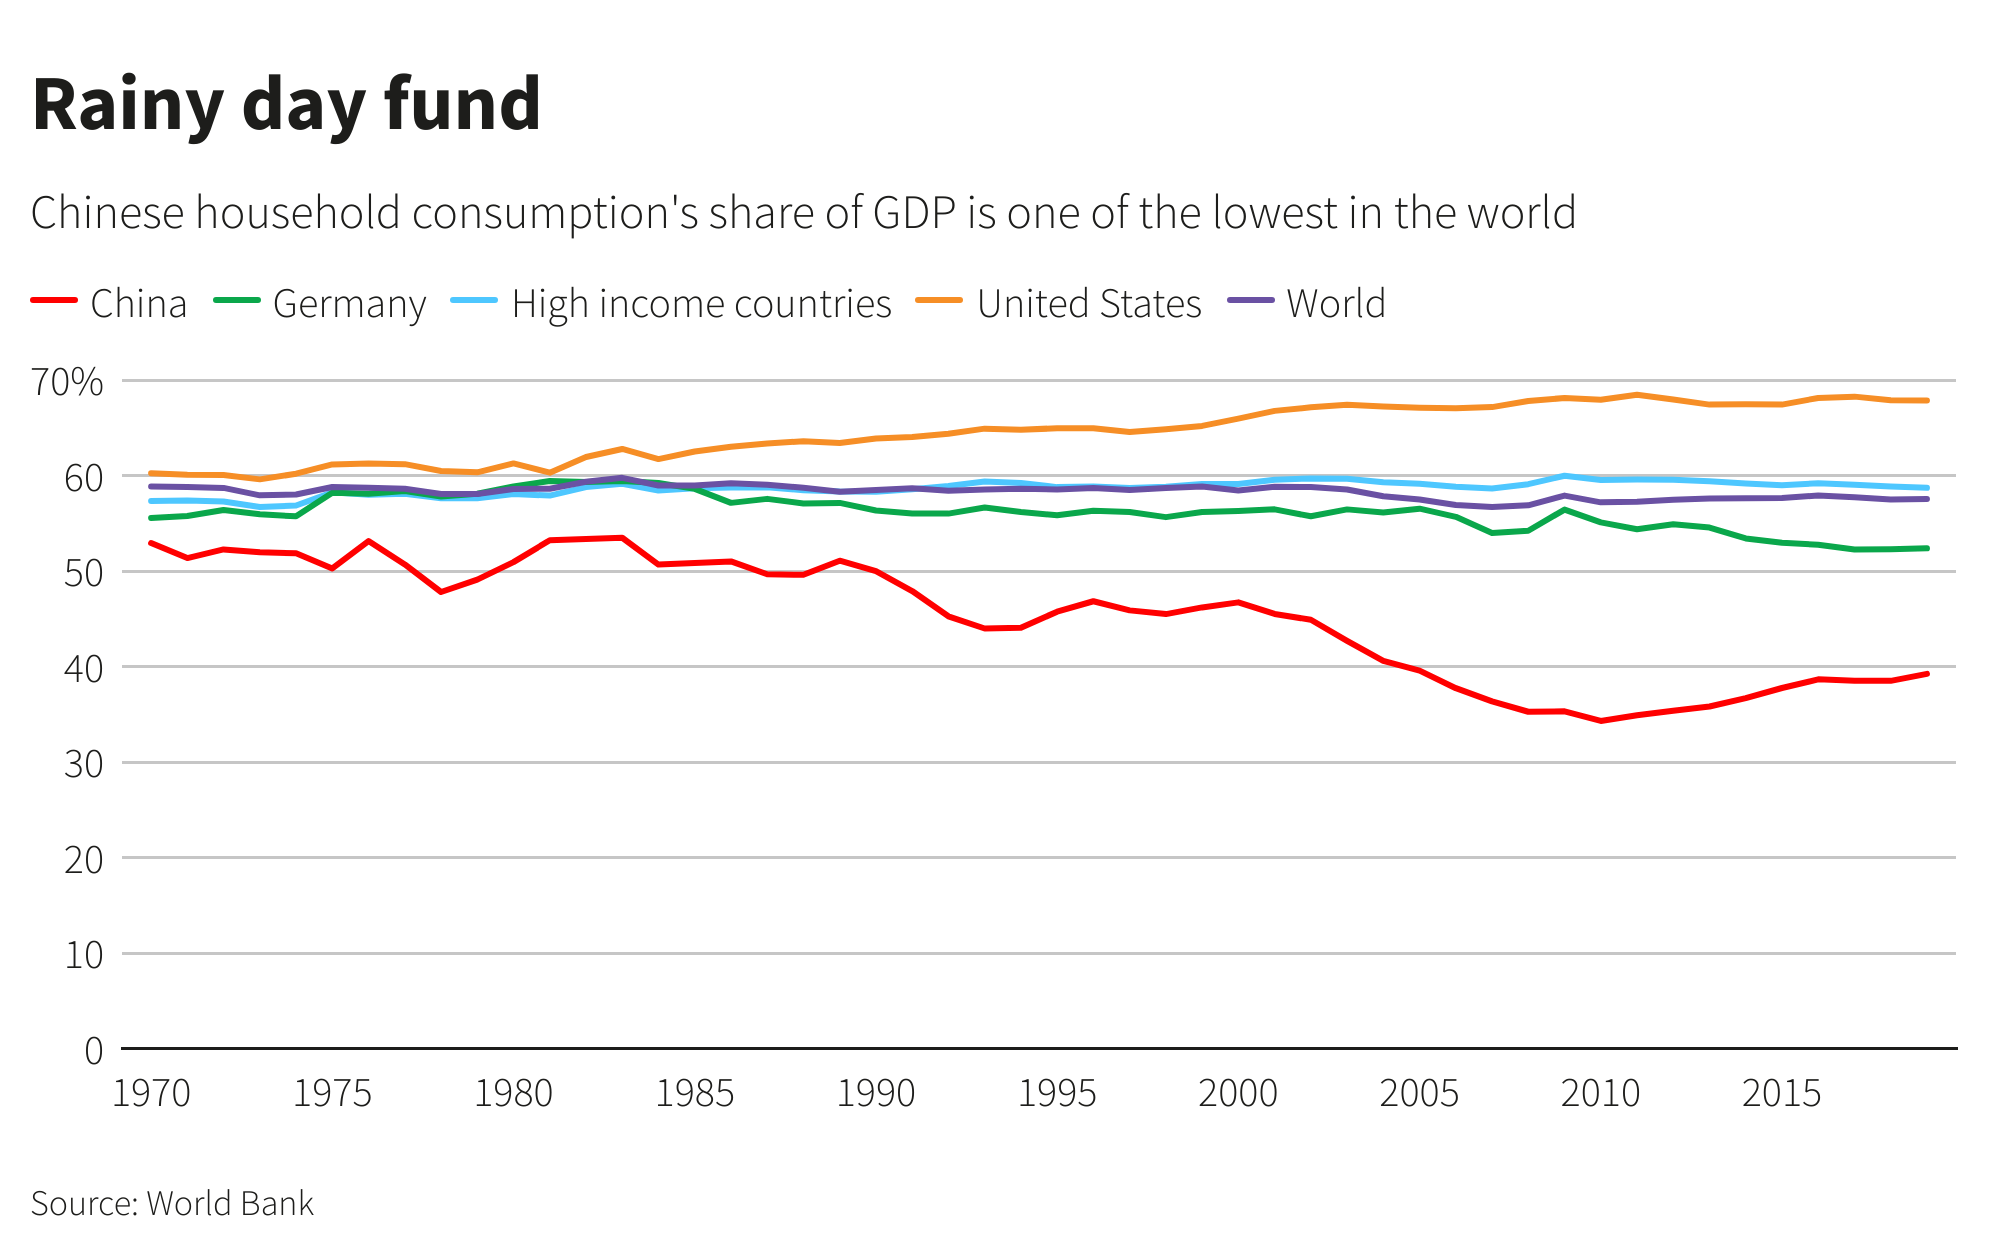 Rainy day fund: Chinese household consumption's share of GDP is one of the lowest in the world